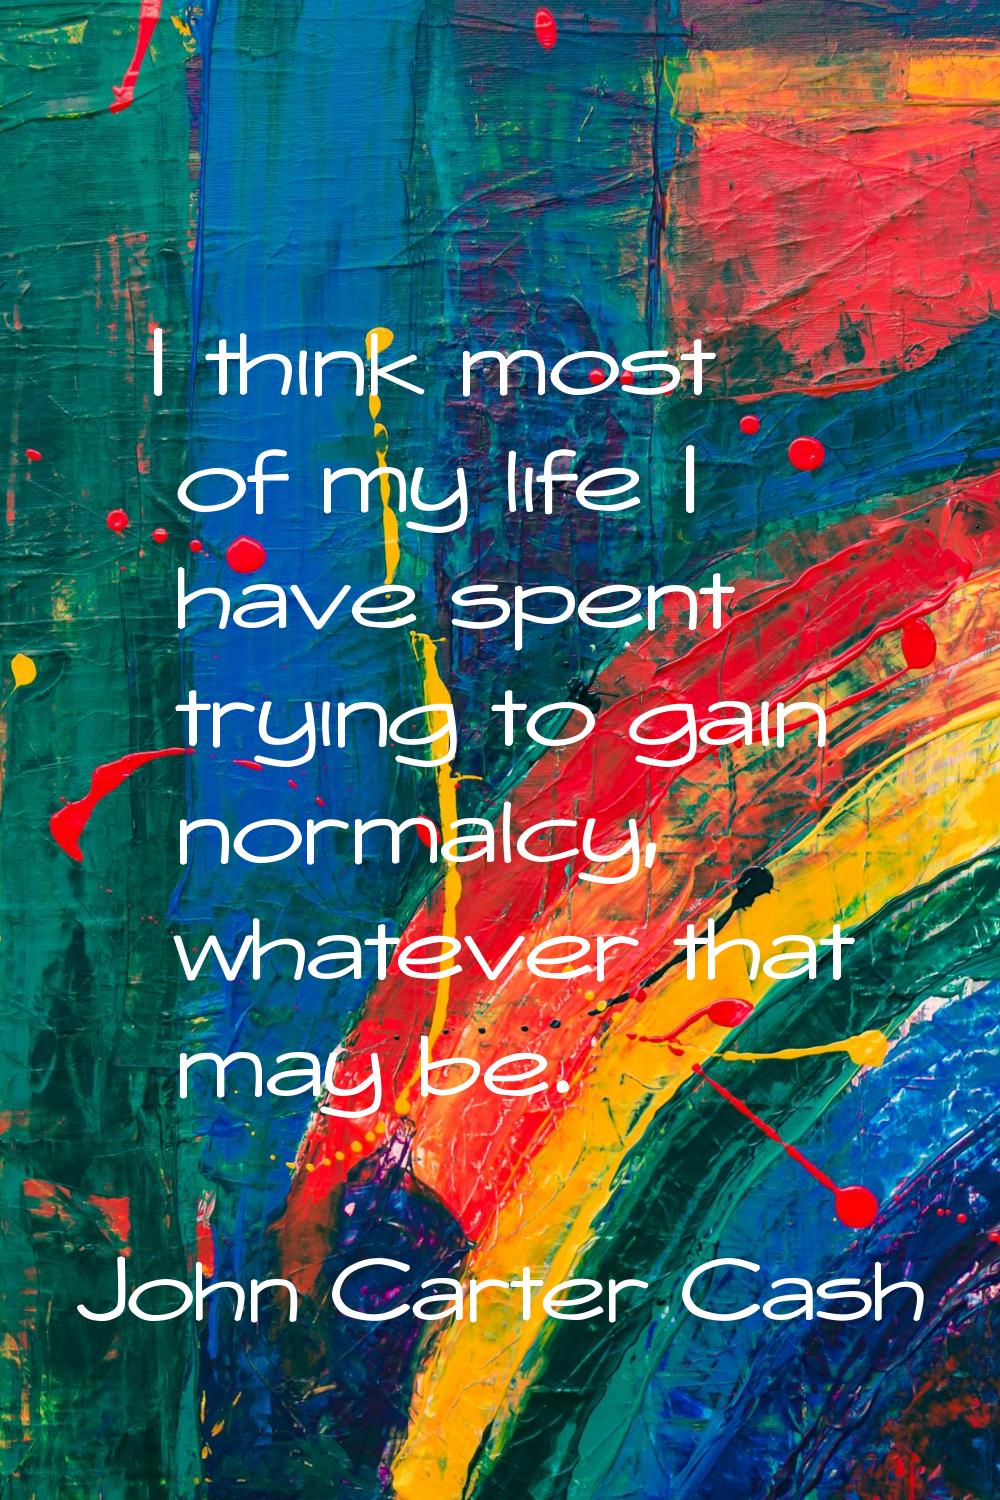 I think most of my life I have spent trying to gain normalcy, whatever that may be.